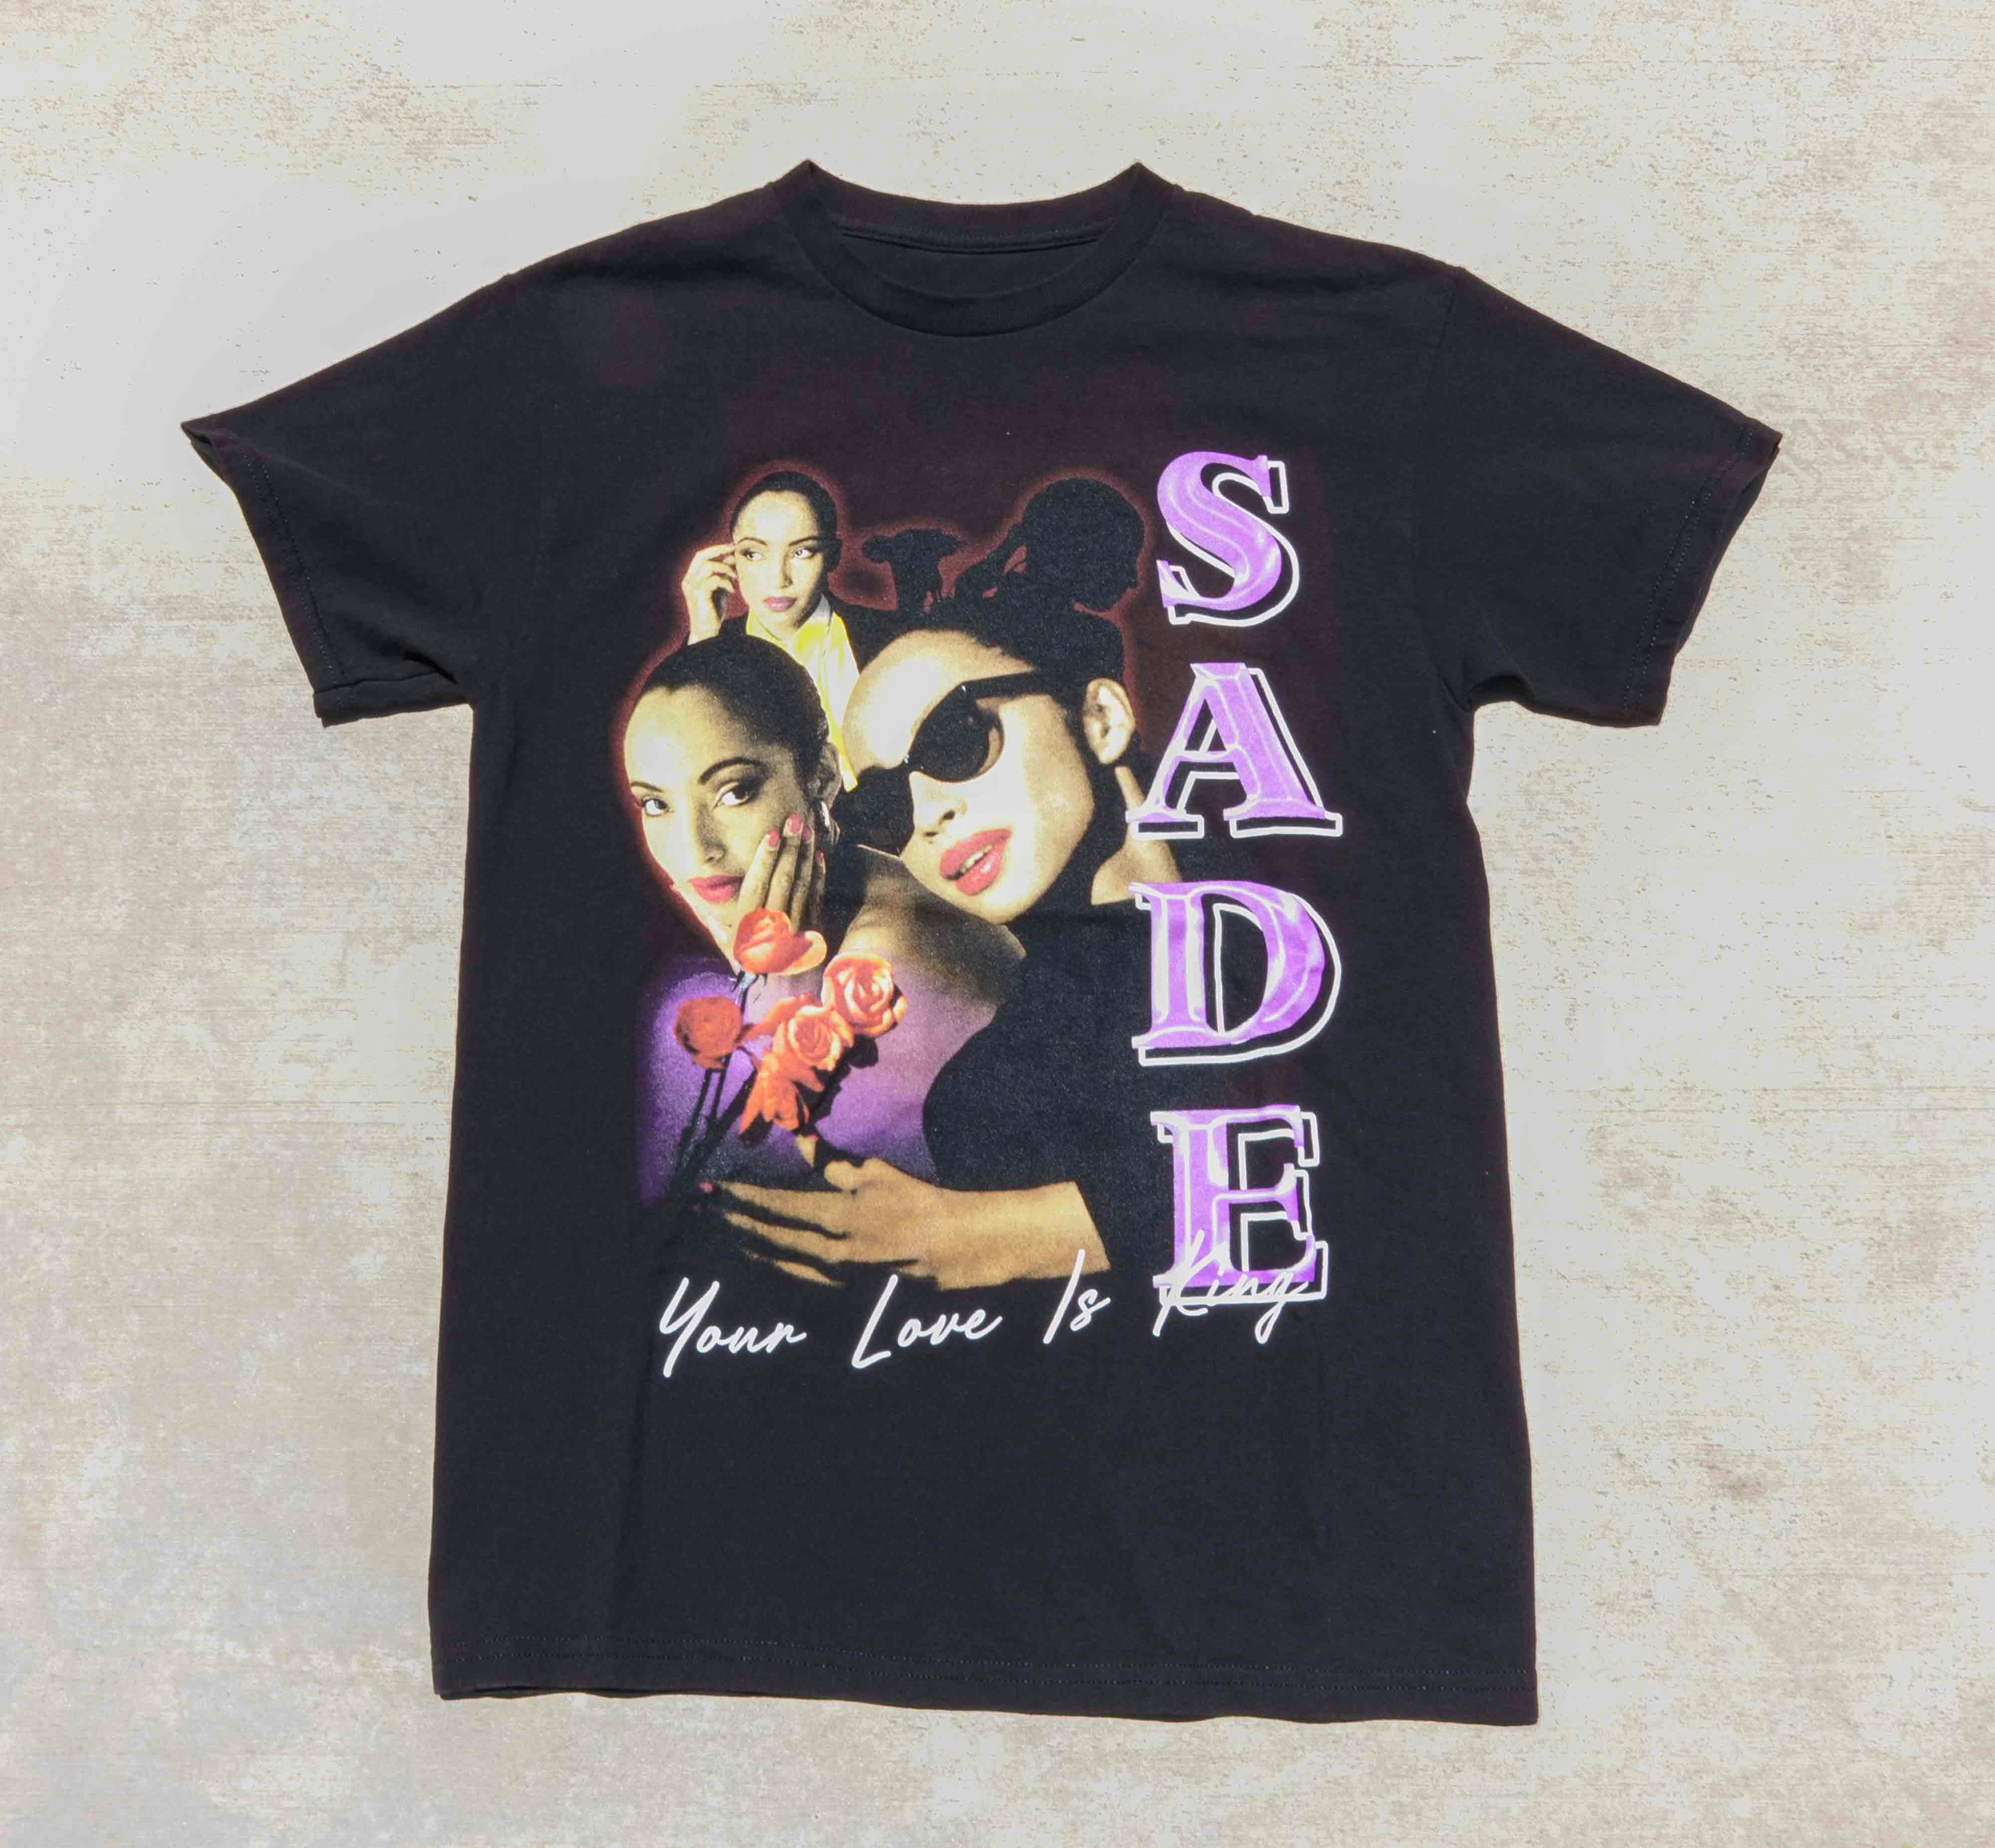 Sade 'Your Love is King' T-Shirt